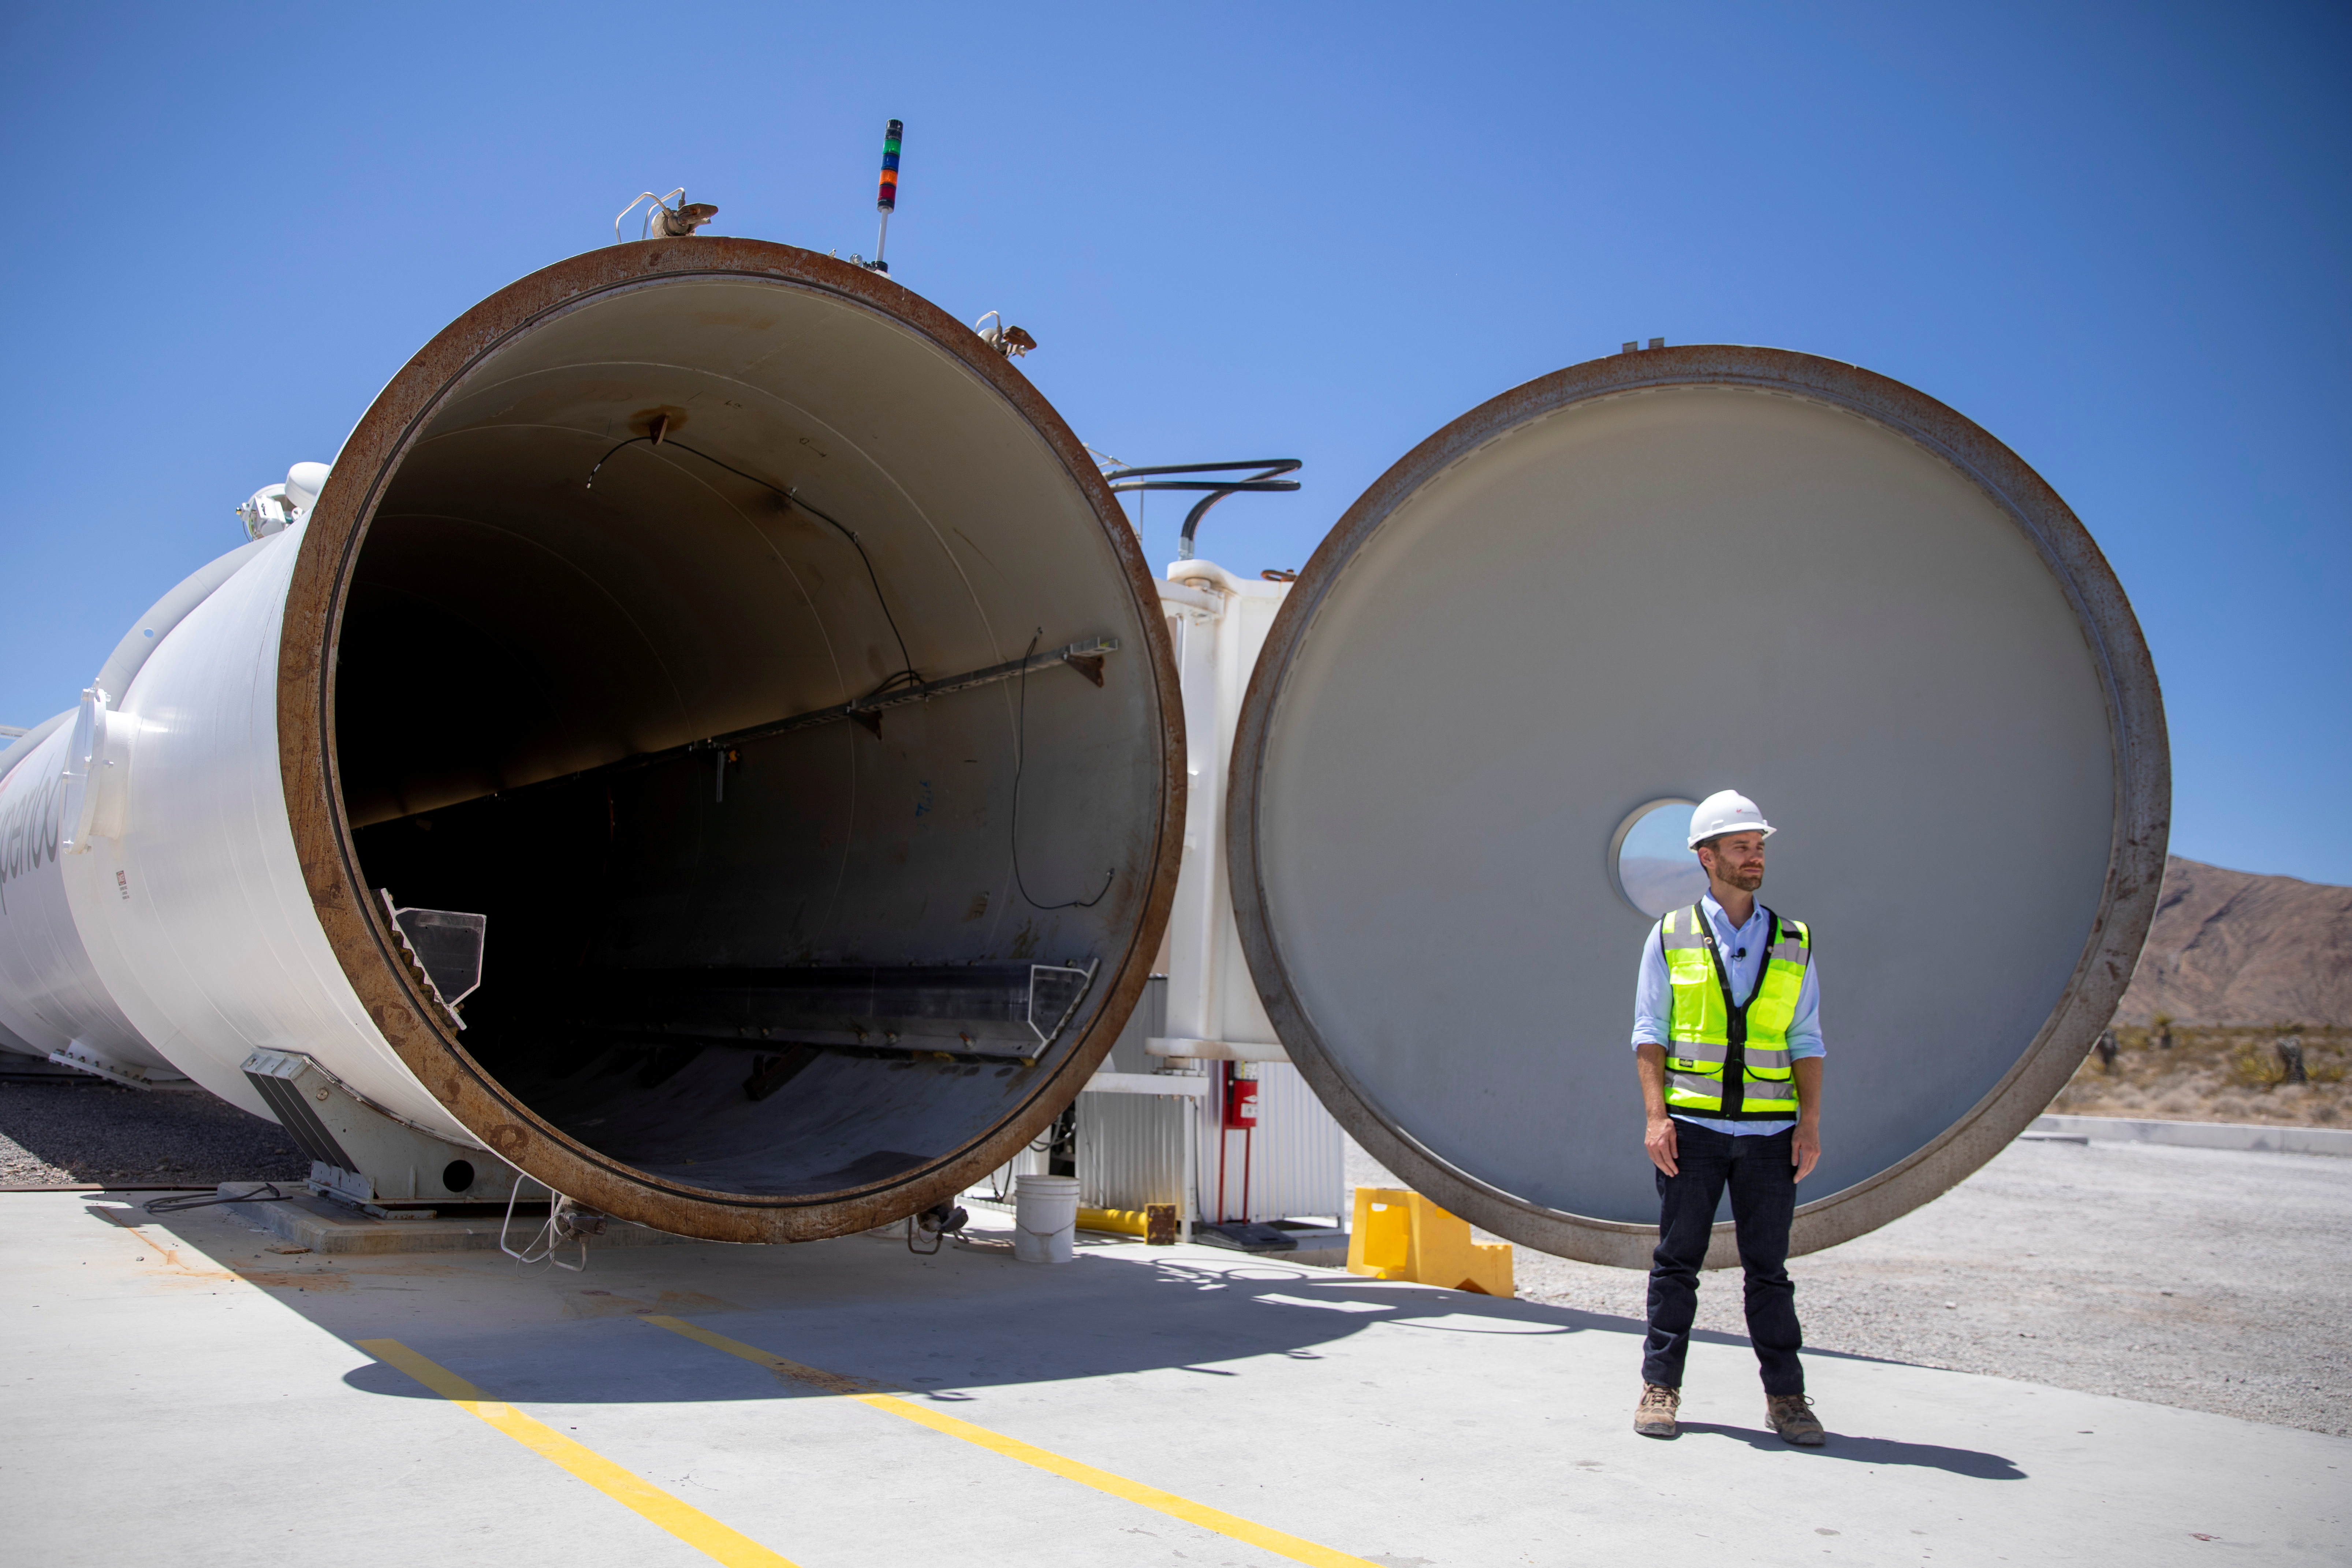 Josh Giegel, co-founder and CEO of Virgin Hyperloop, stands next to a hyperloop tube at the company's hyperloop facility near Las Vegas